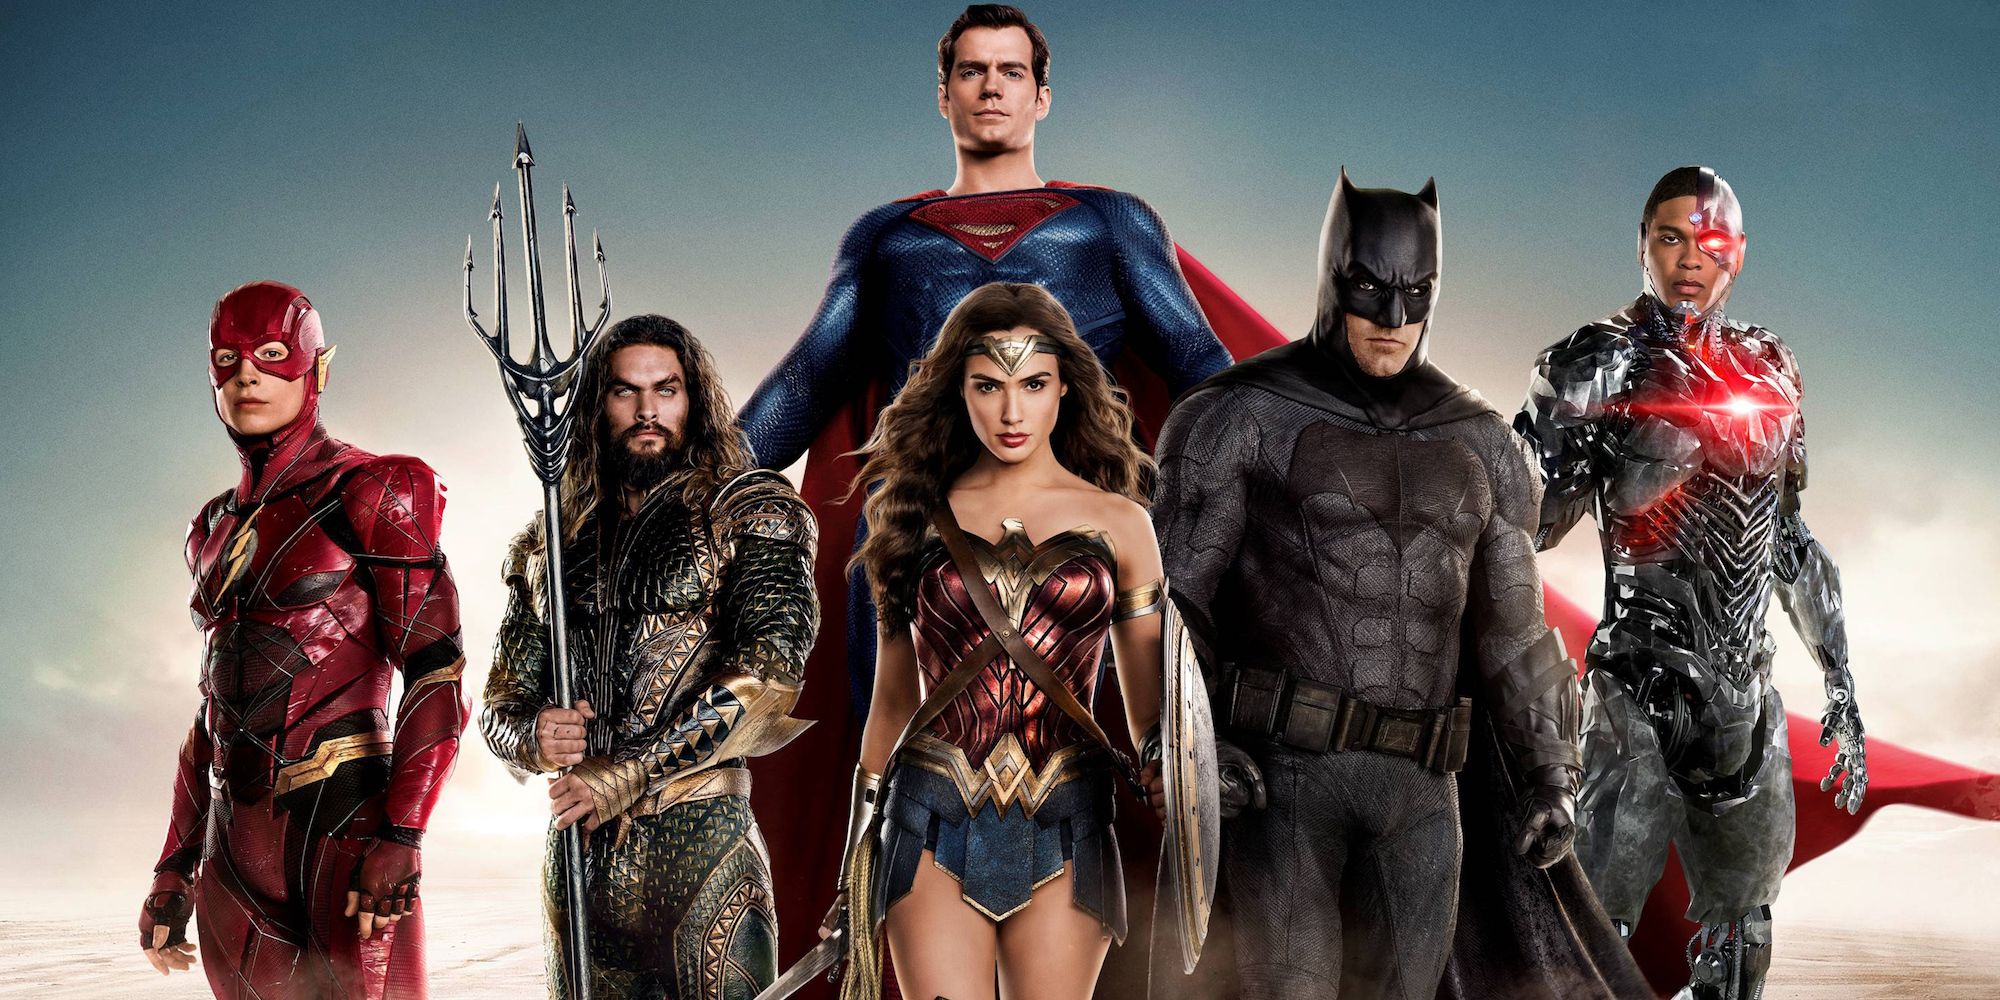 The Justice League as seen in 2017's Justice League